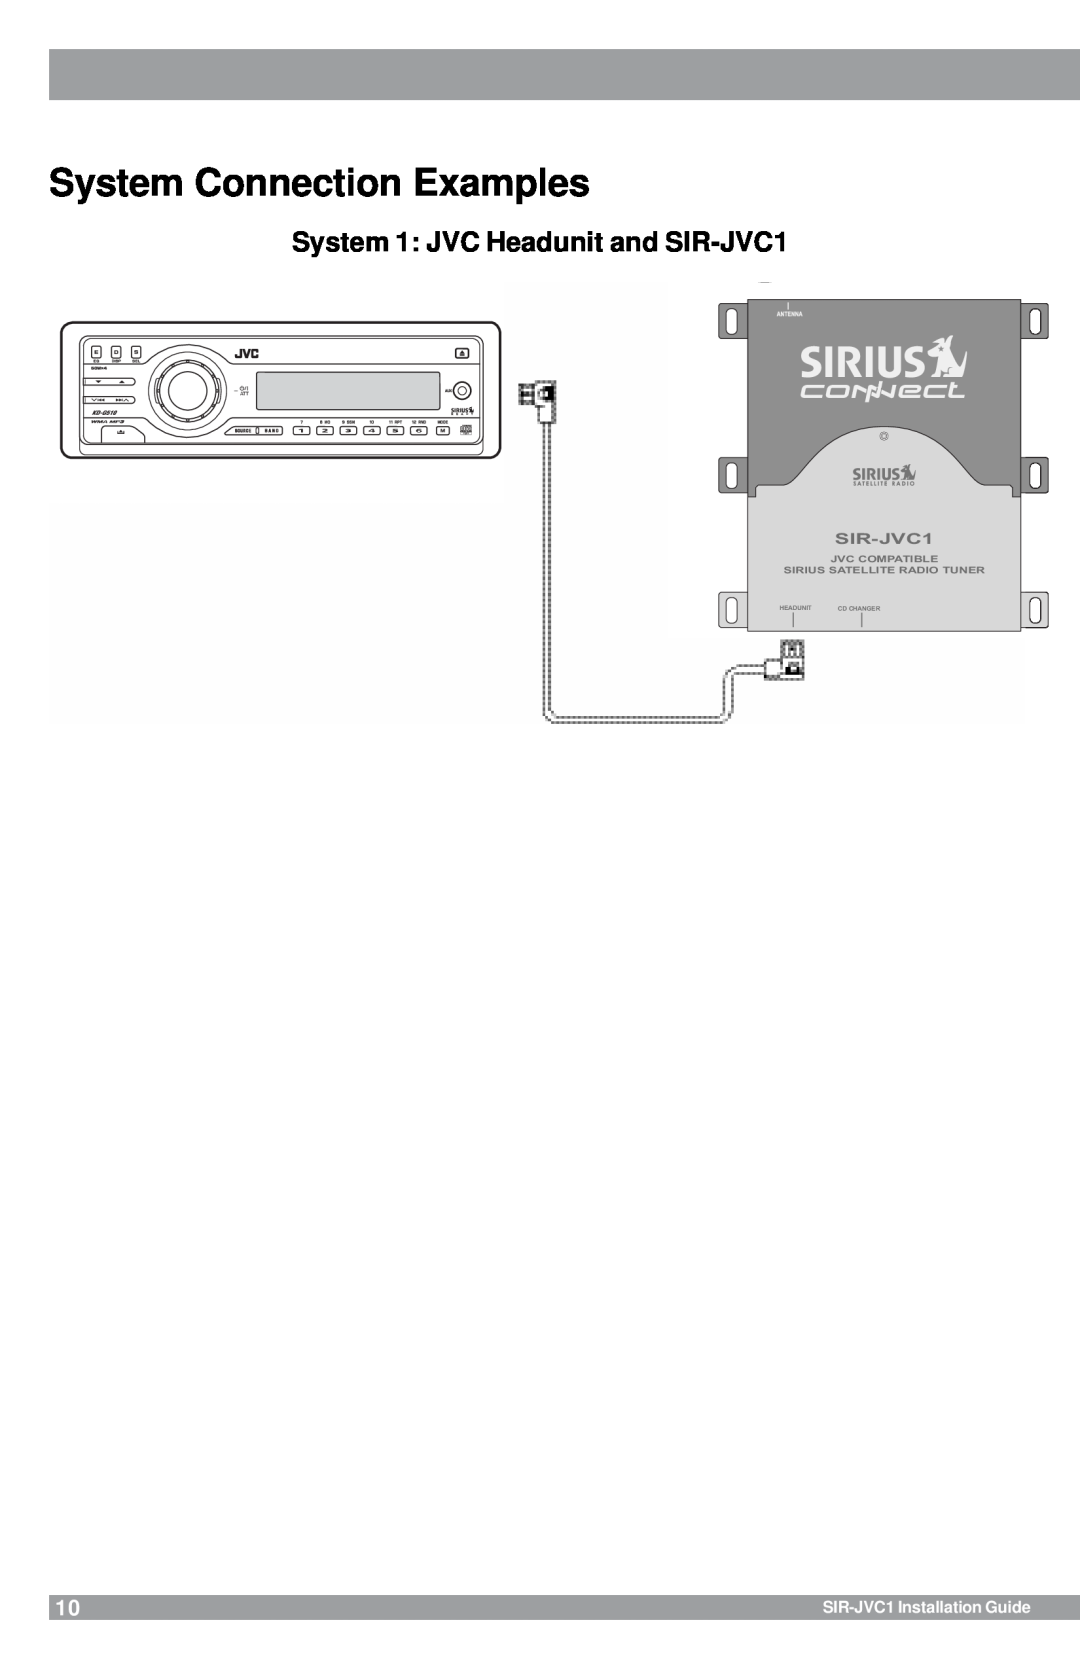 Sirius Satellite Radio manual System Connection Examples, SIR-JVC1Installation Guide, Headunit, Cd Changer 